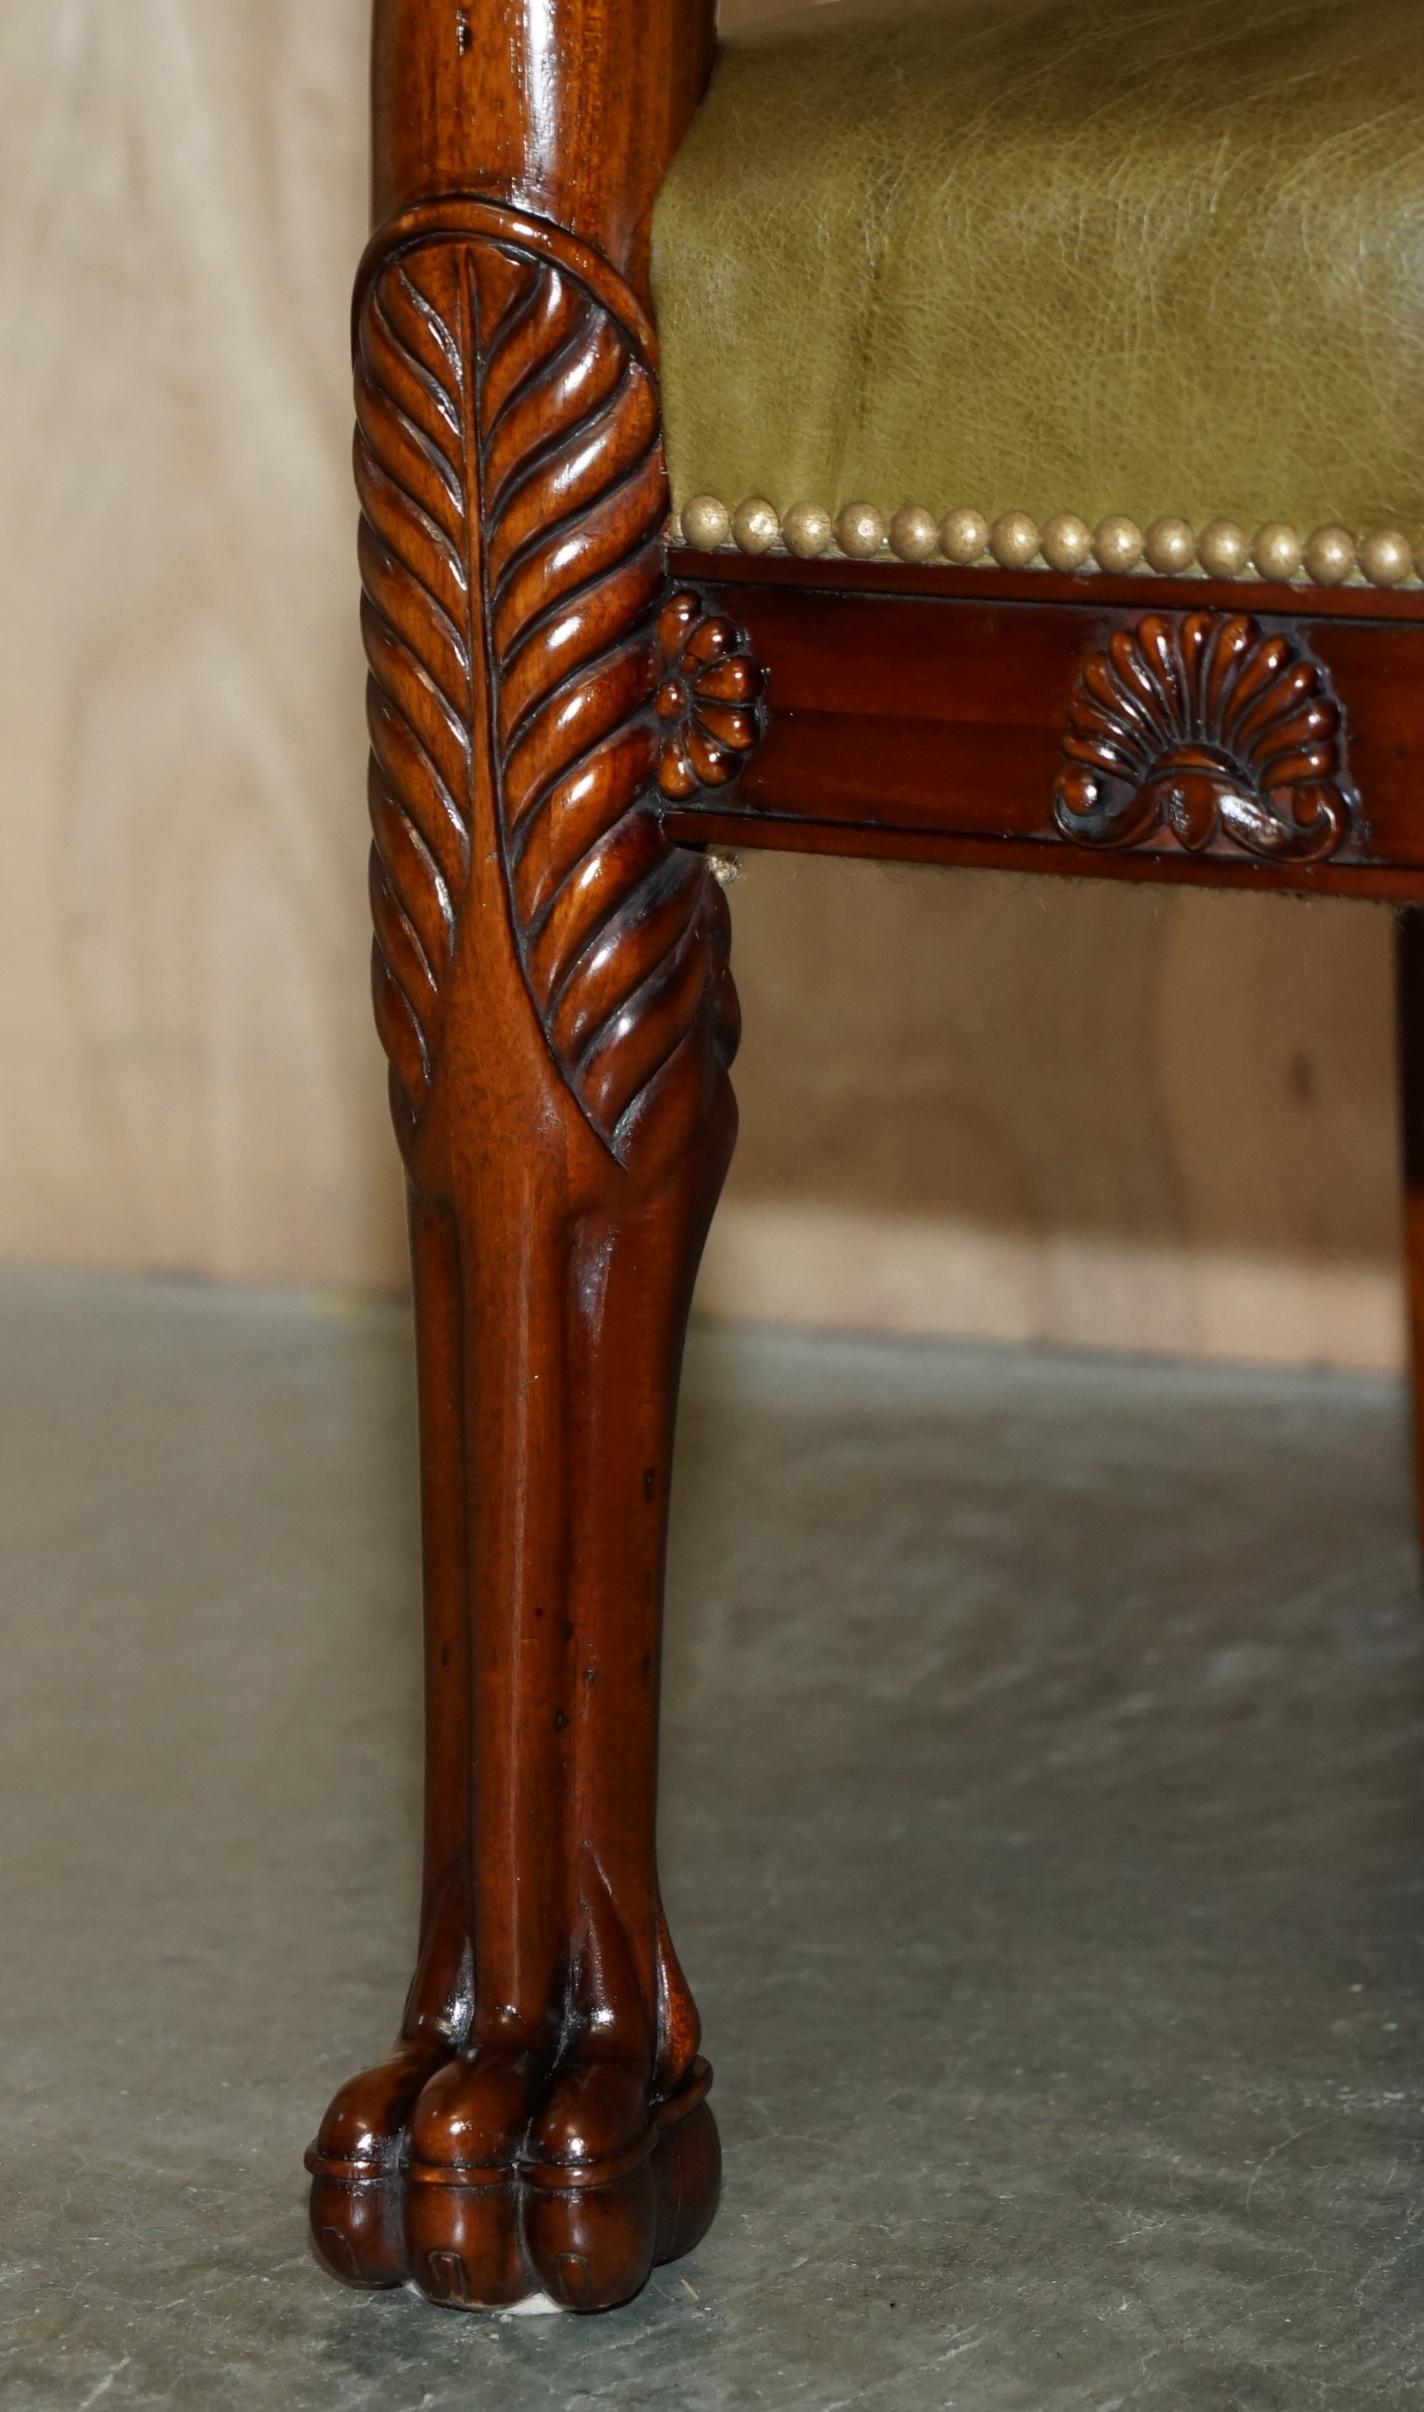 EXQUISITE PAIR OF HAND CARved HARDWOOD LiBRARY ARMCHAIRS LION GRIFFON WING ARMS im Angebot 3